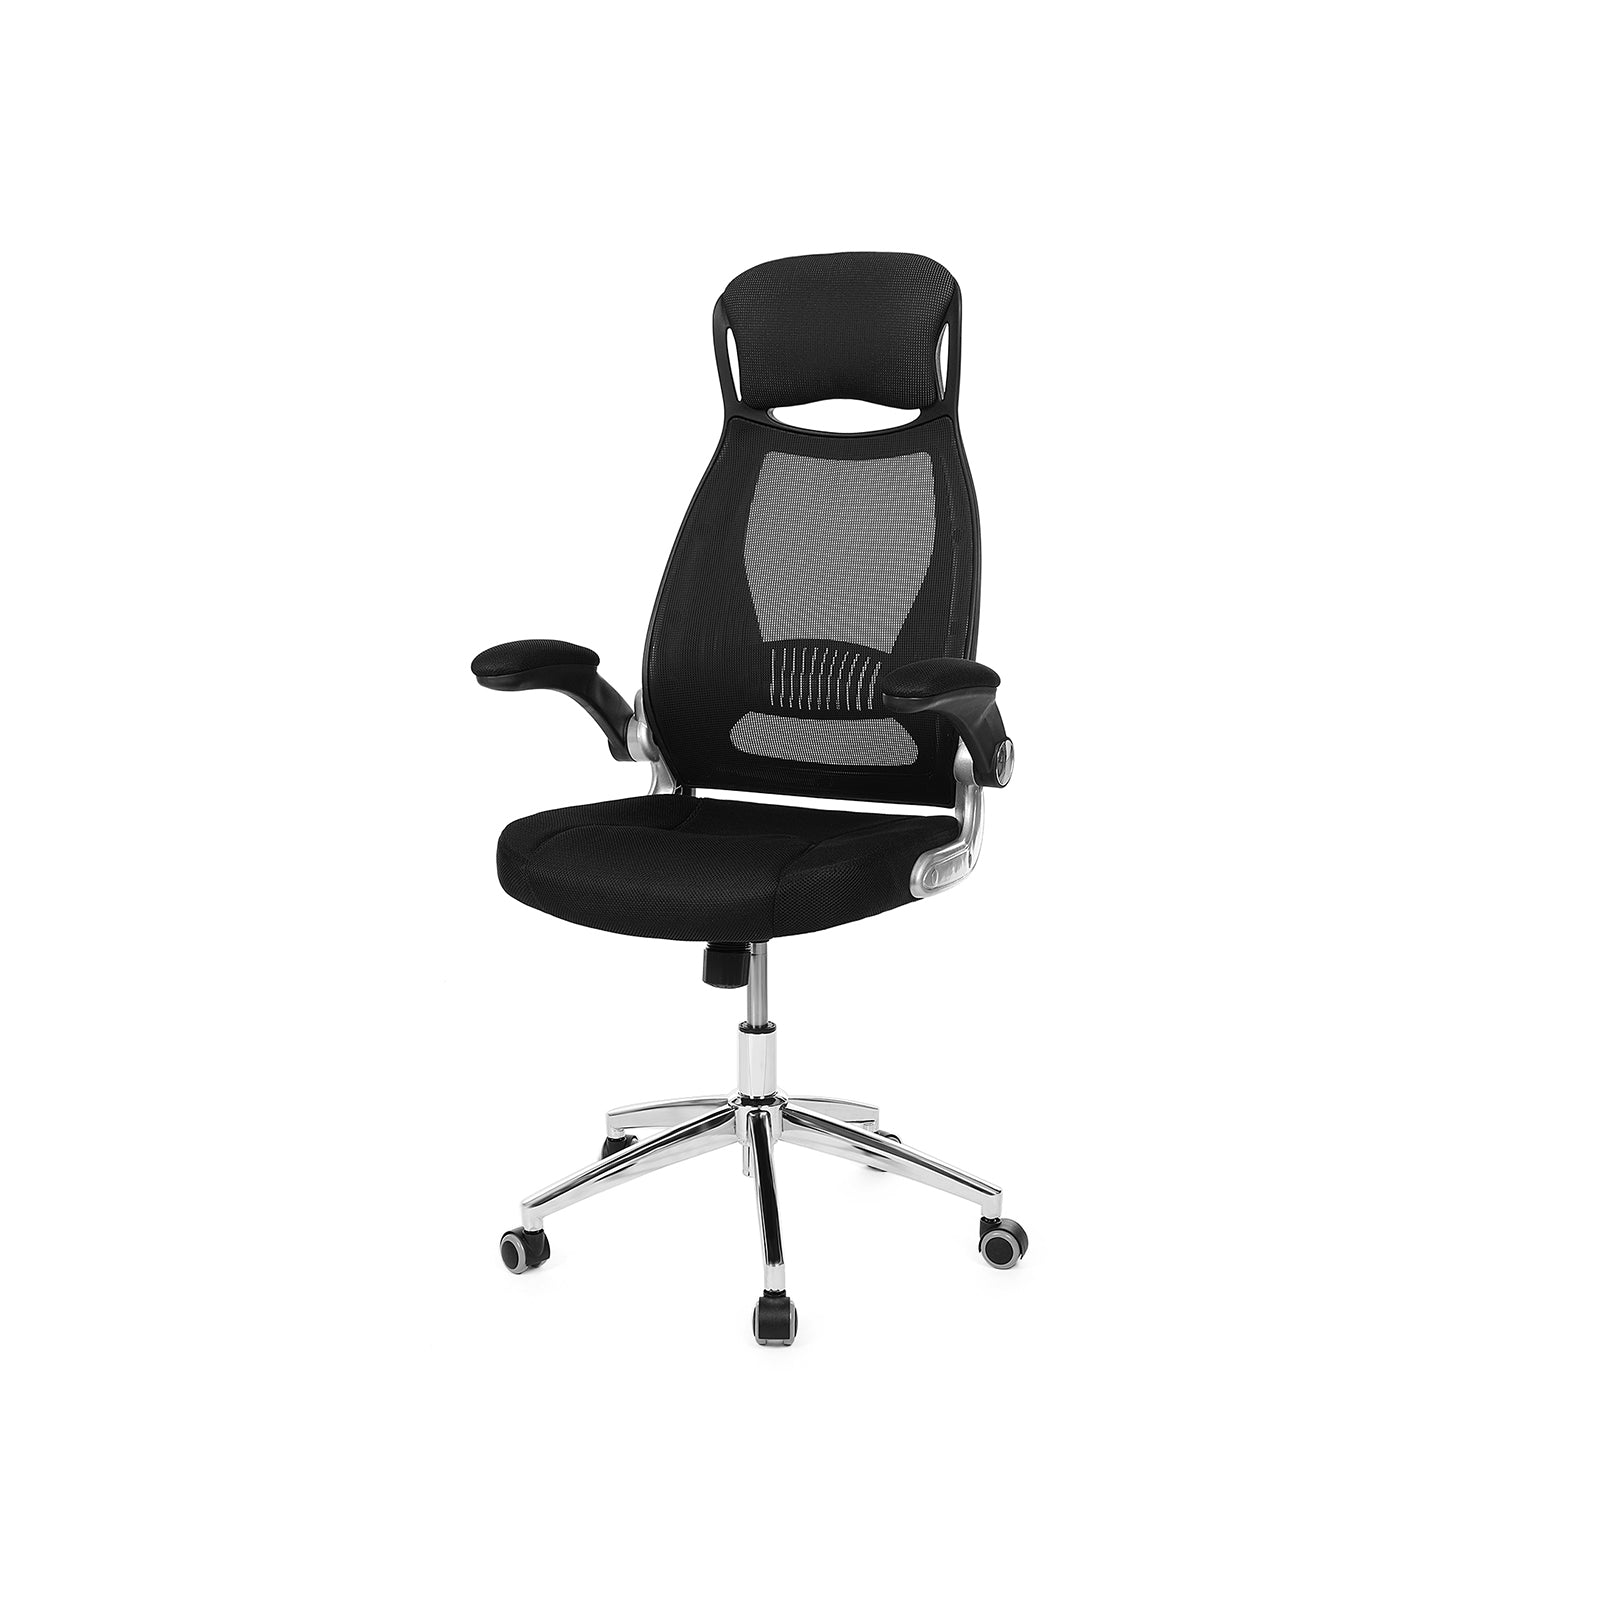 Office chair sale, black office chair, small office chair, office desk chair, gaming office chair, office chair - SONGMICS